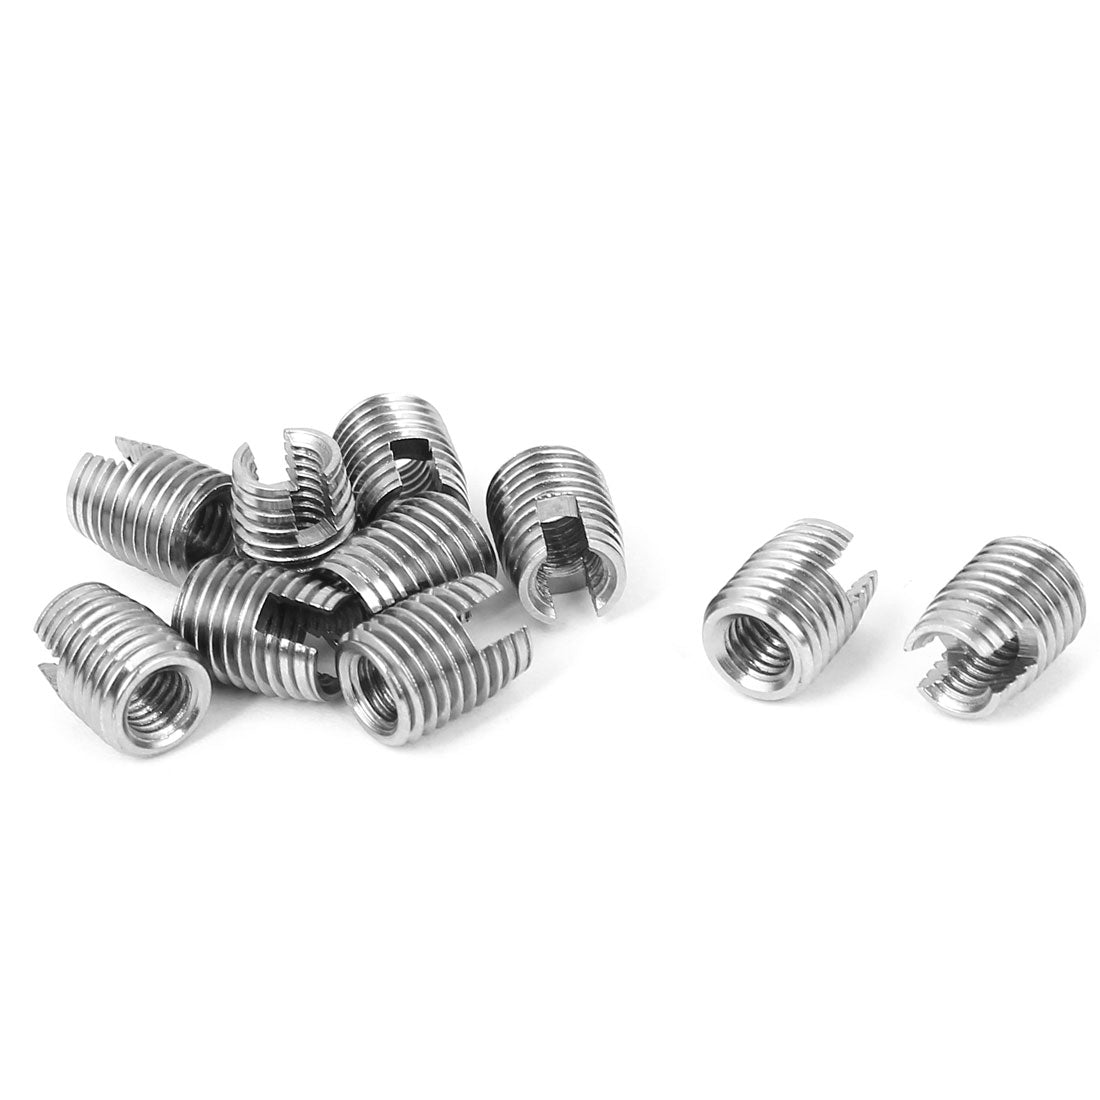 uxcell Uxcell 10mm Length Stainless Steel 306 Type Self Tapping Threaded Insert 10pcs